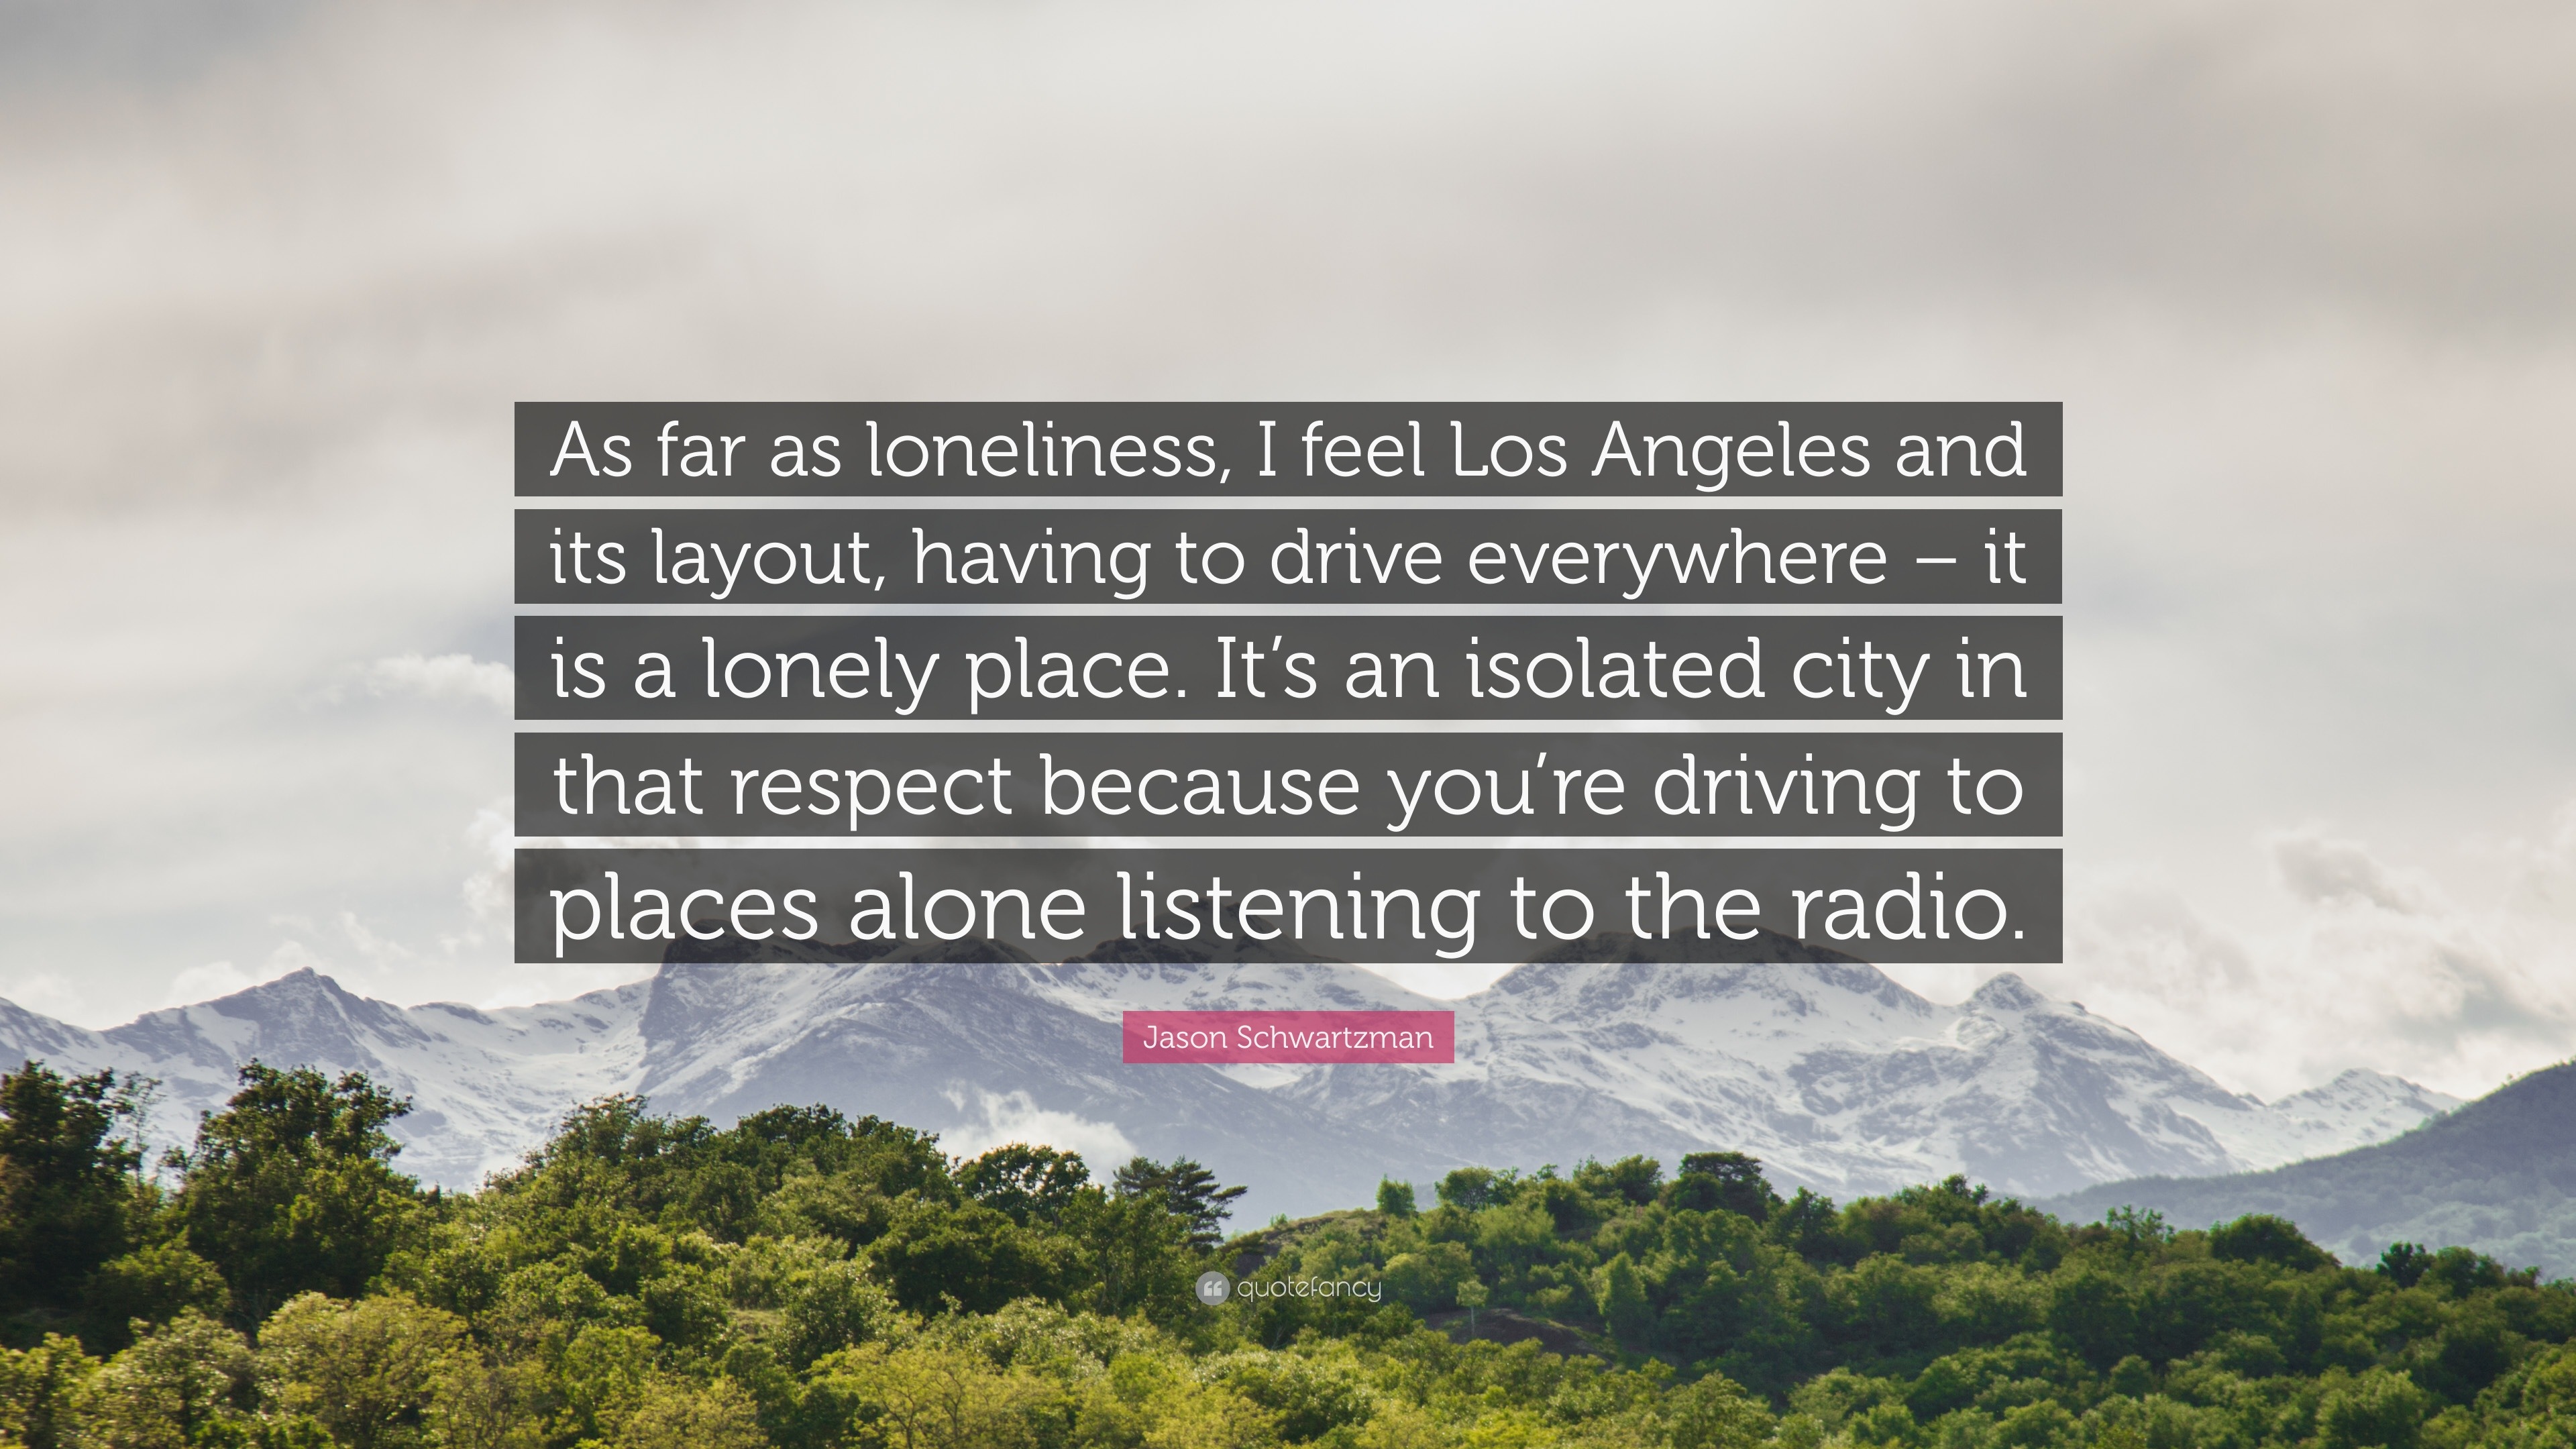 Los Angeles is Lonely